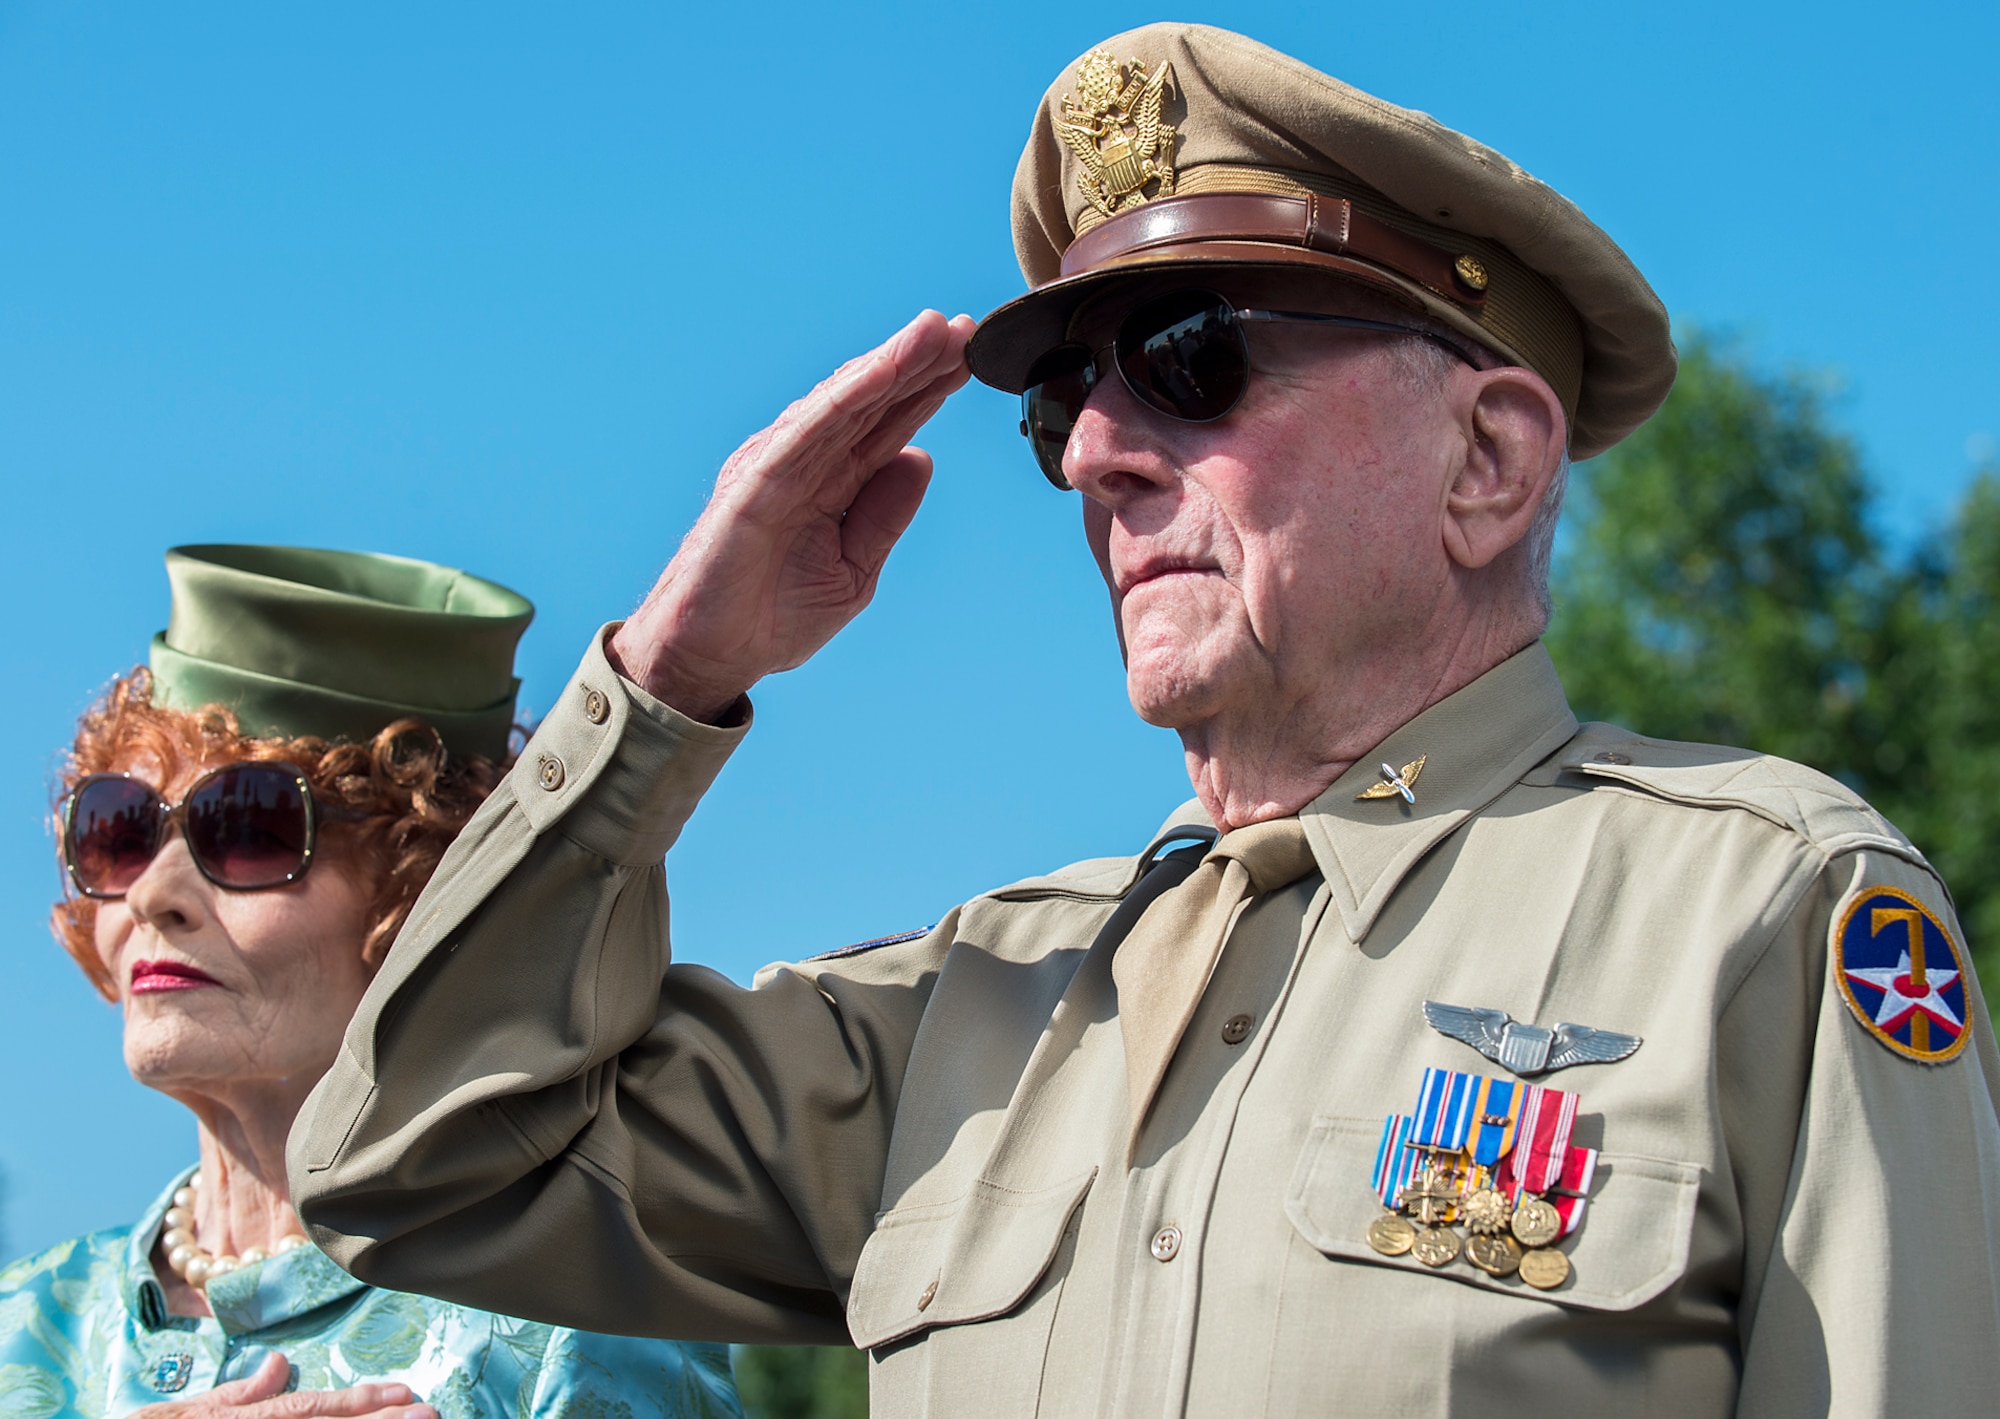 Capt. Jerry Yellin, a World War II P-51 pilot and the national spokeman for the Spirit of 45 Organization renders honors during a Memorial Day wreath-laying ceremony May 26, 2014, at the Air Force Memorial, Arlington, Va. During his keynote address, Chief Master Sgt. of the Air Force James A. Cody urged audience members to remember the fortitude shown by the nation's fallen in fighting and standing their ground. (U.S. Air Force photo/Jim Varhegyi)